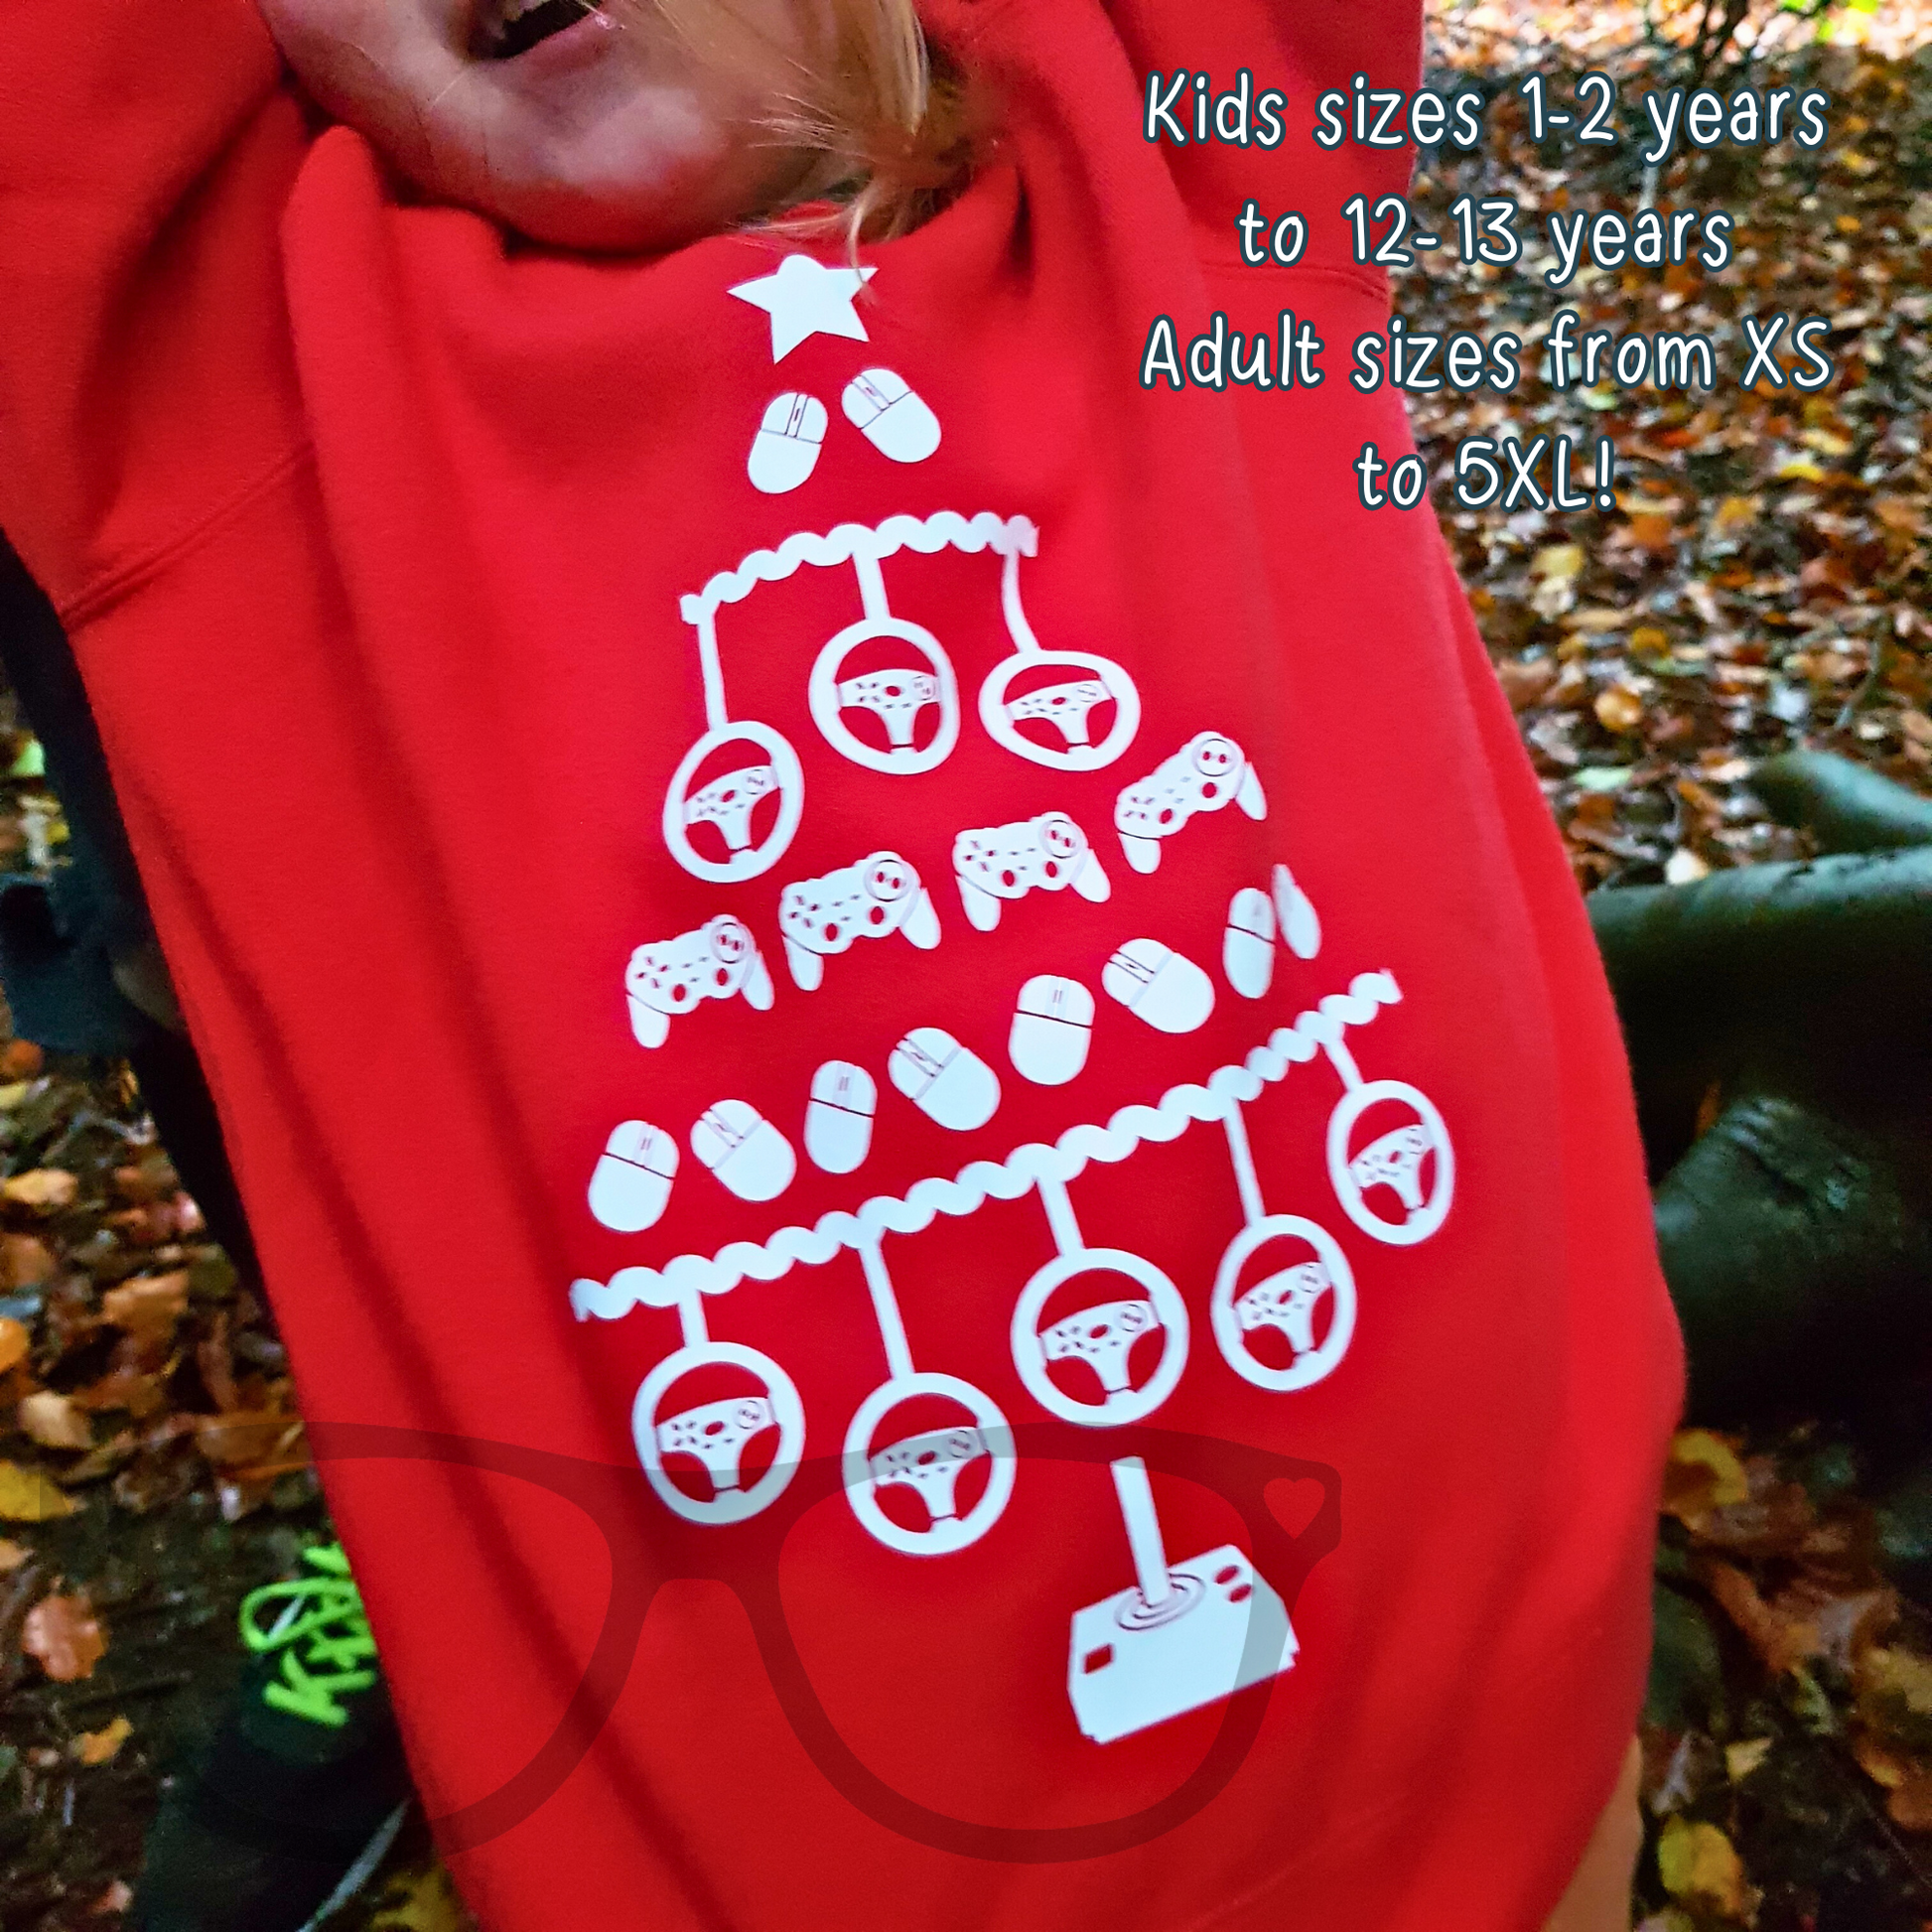 Video gaming christmas ugly sweater for kids and adults. red snuggly sweater with white heat pressed vinyl design. Text reads "Kids sizes 1-2 years adults sizes XS to 5XL!"